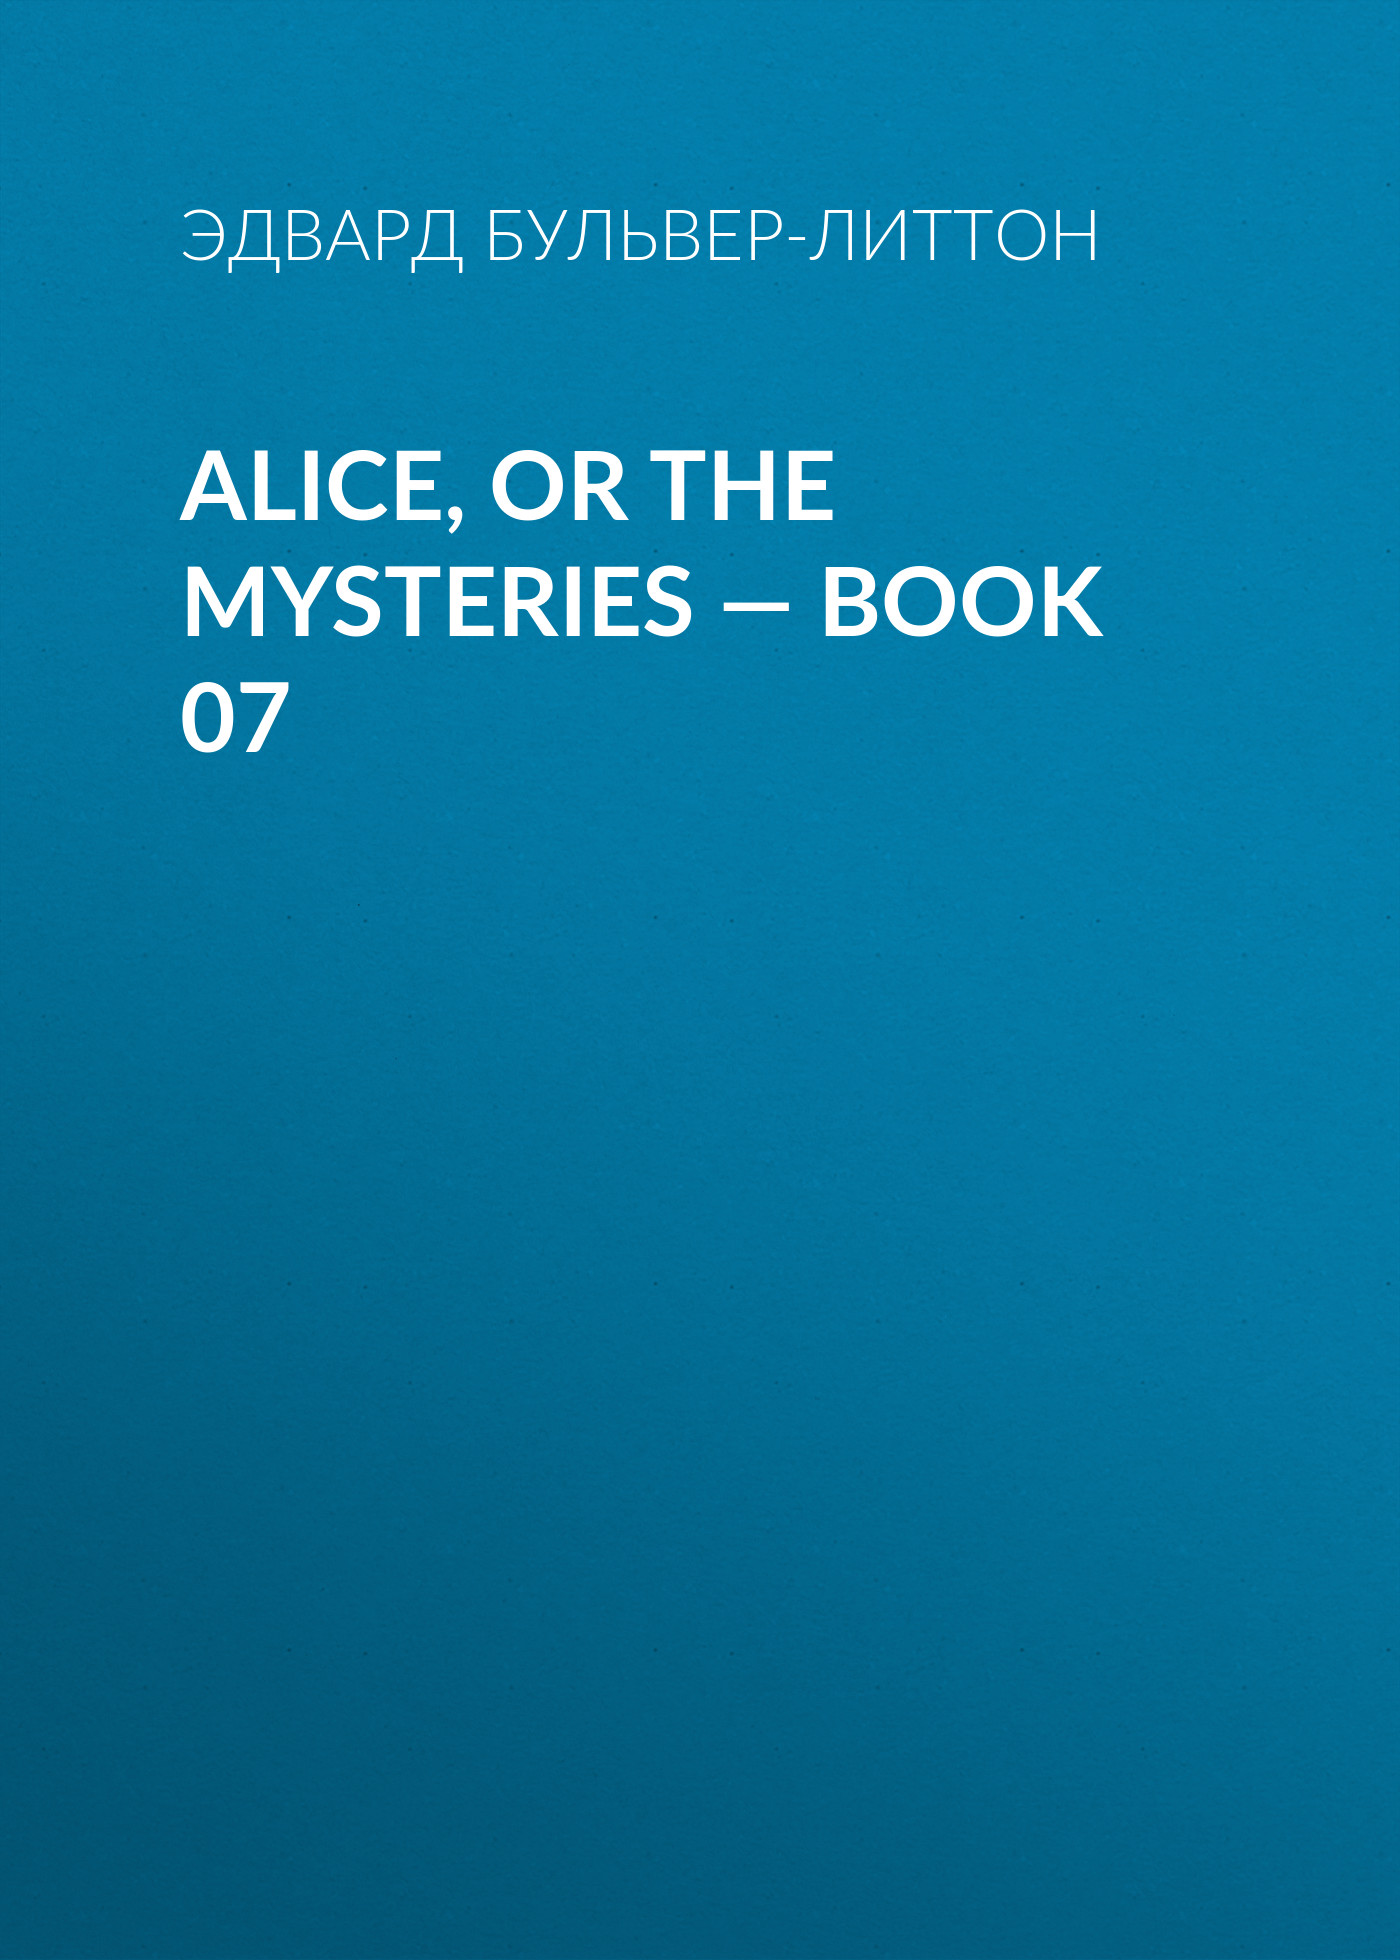 Alice, or the Mysteries— Book 07